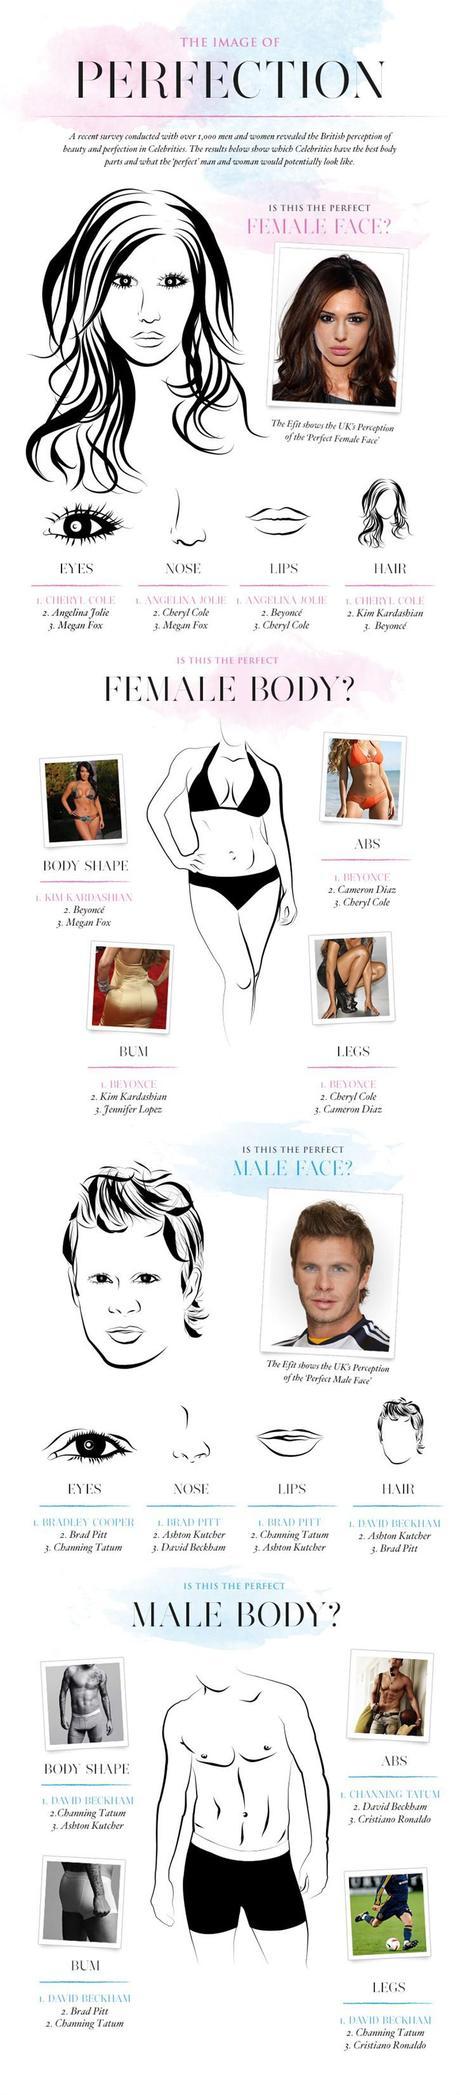 Infographic on British Perception of Beauty